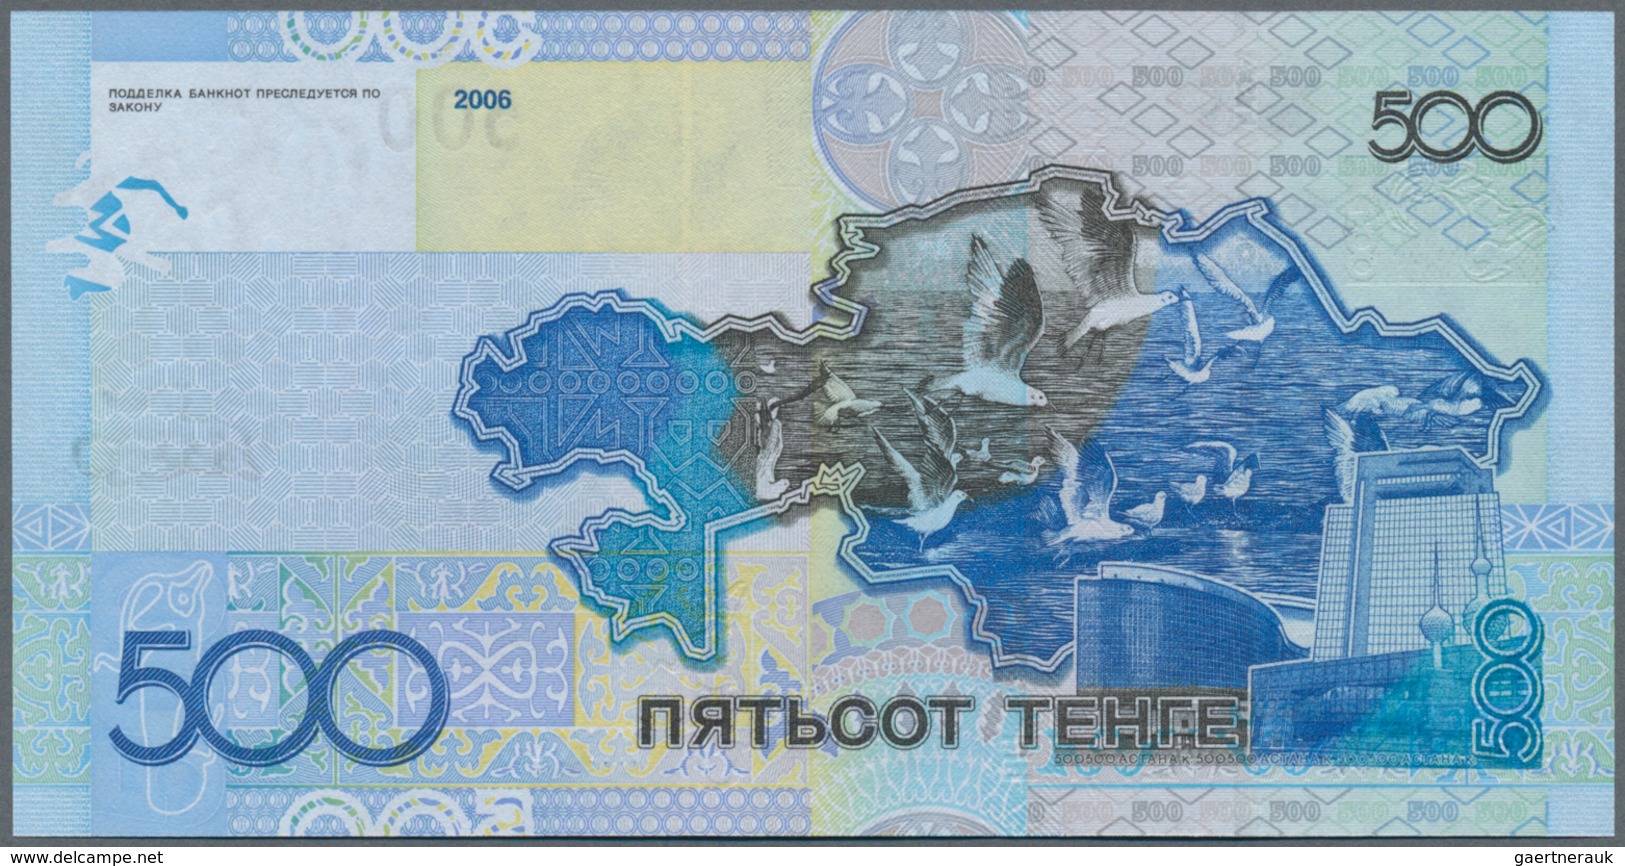 Kazakhstan / Kasachstan: Nice lot with 8 banknotes of the 2006 issue with 200, 2x 500, 1000, 2000, 2